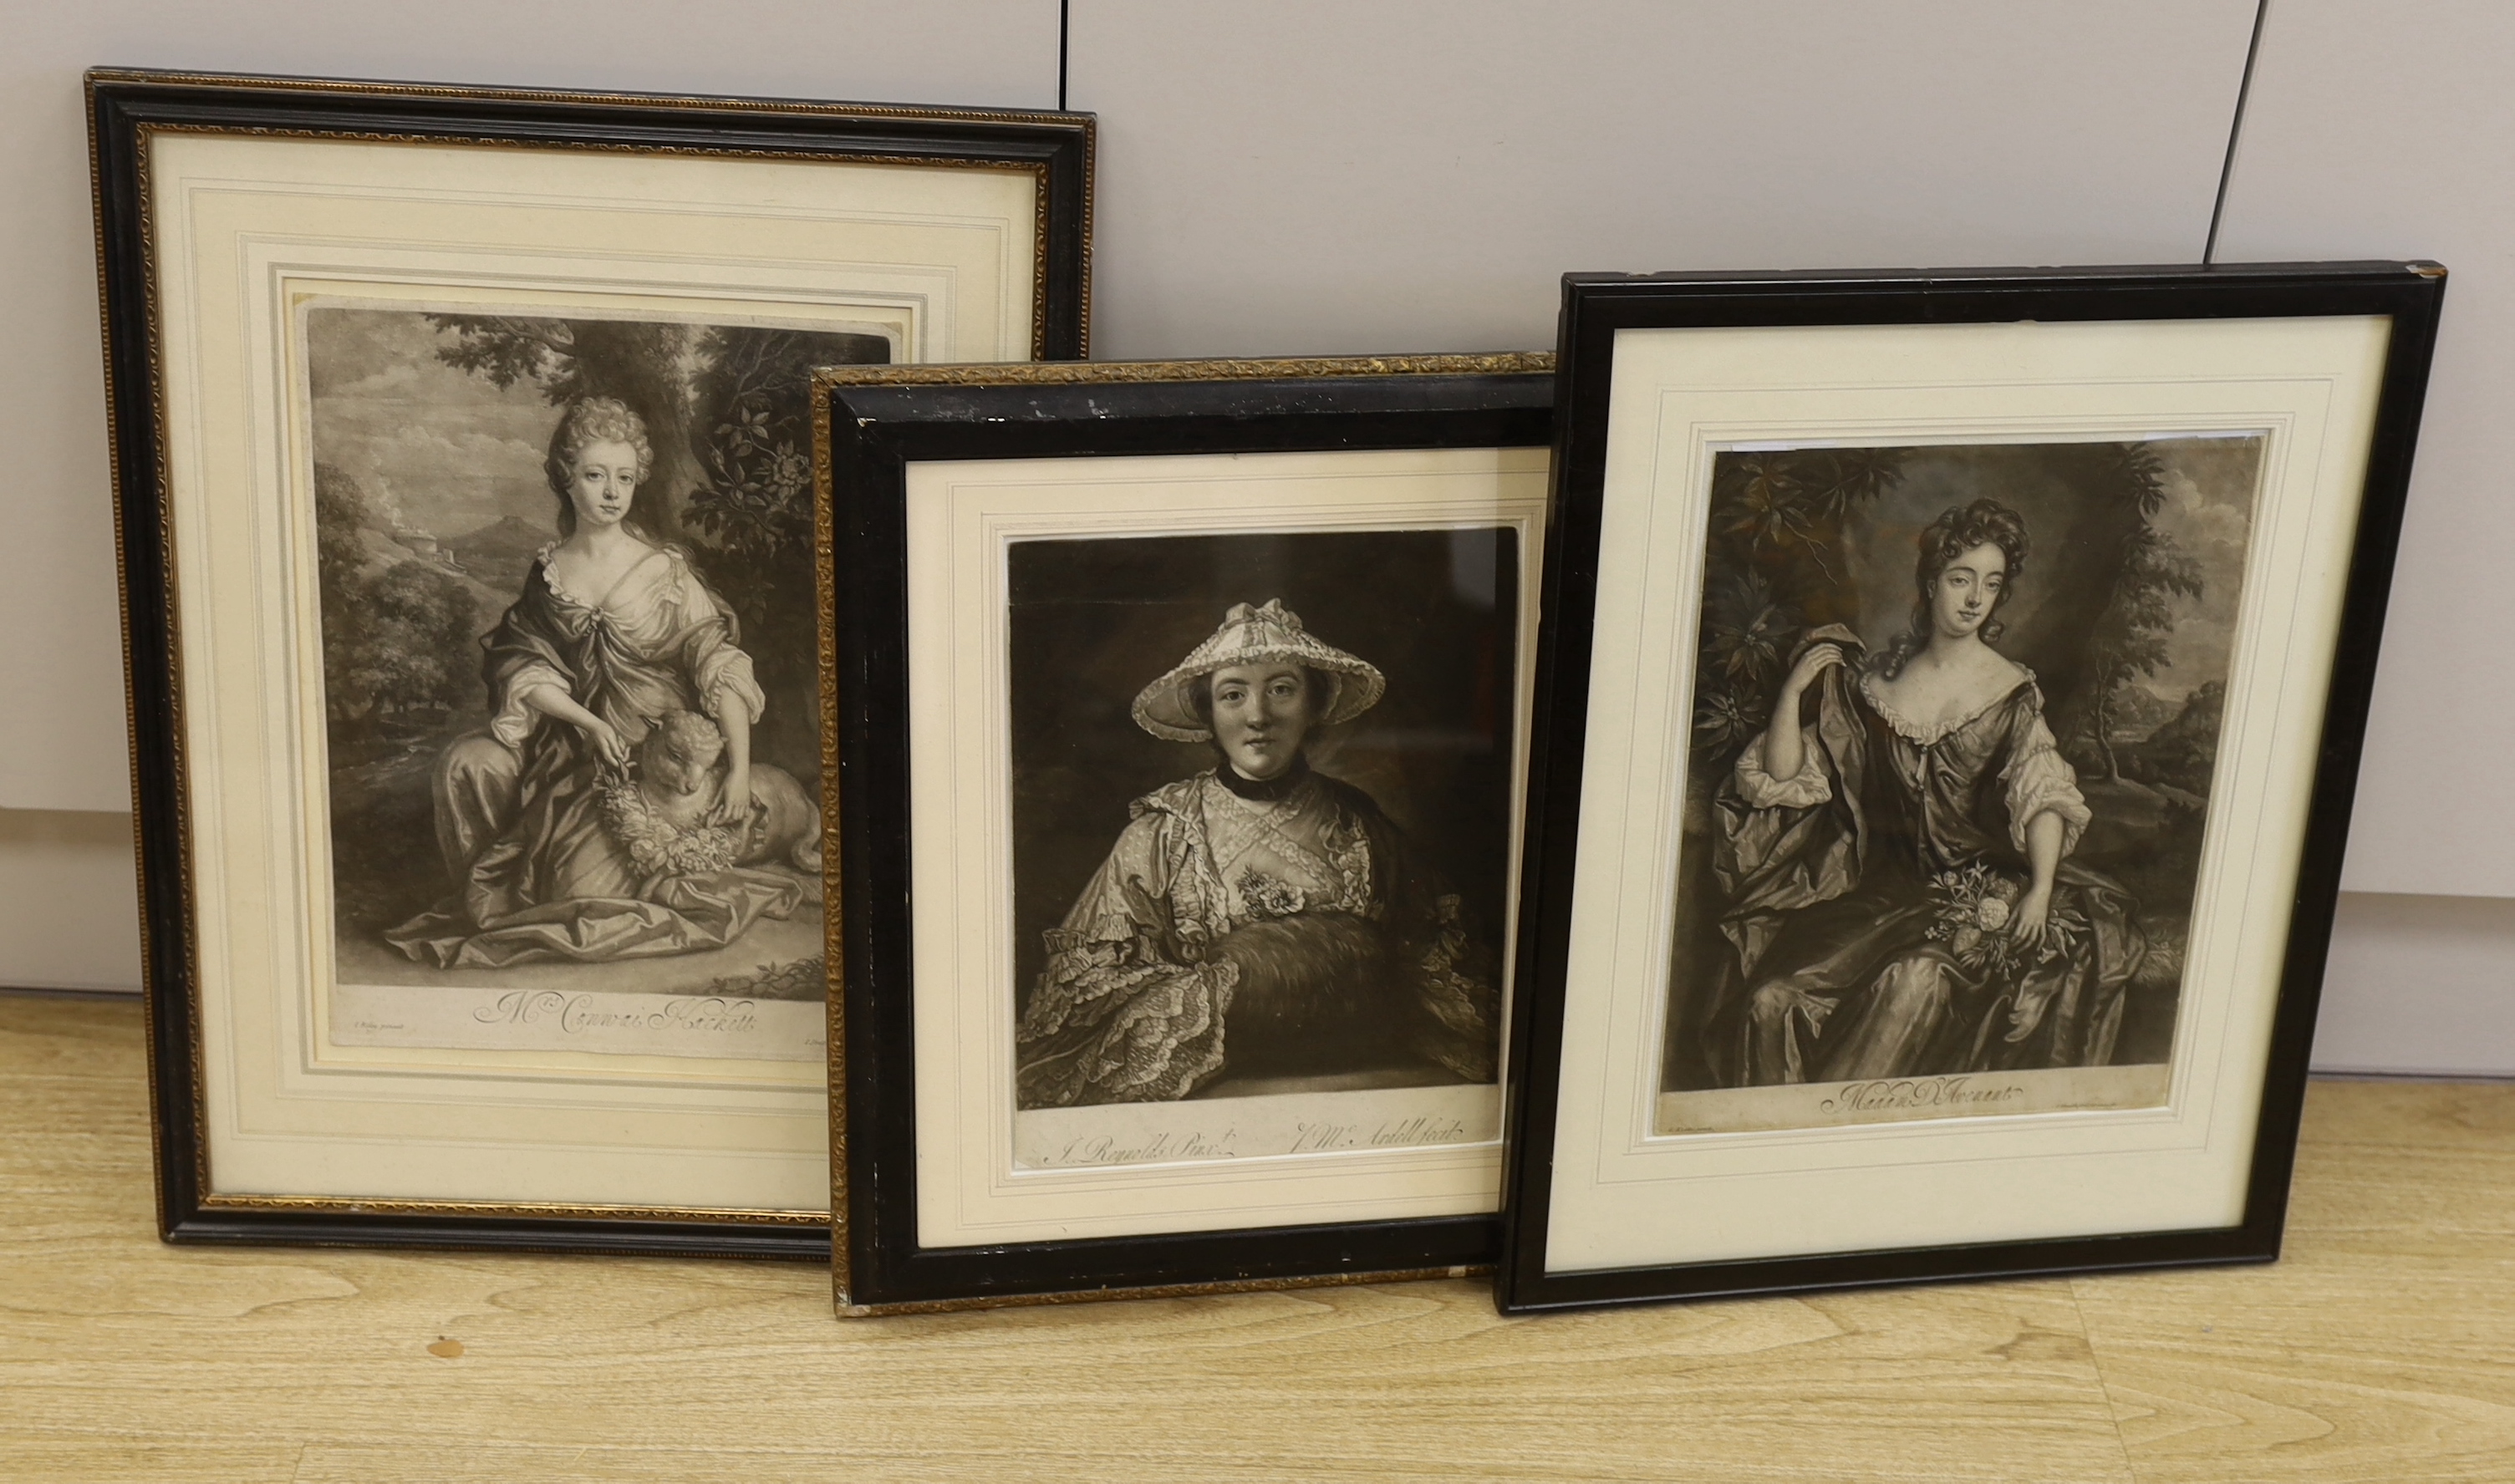 Smith after Riley, mezzotint, 'Mrs Connai Hackett', 32 x 25cm and two other mezzotints after Reynolds and Kneller